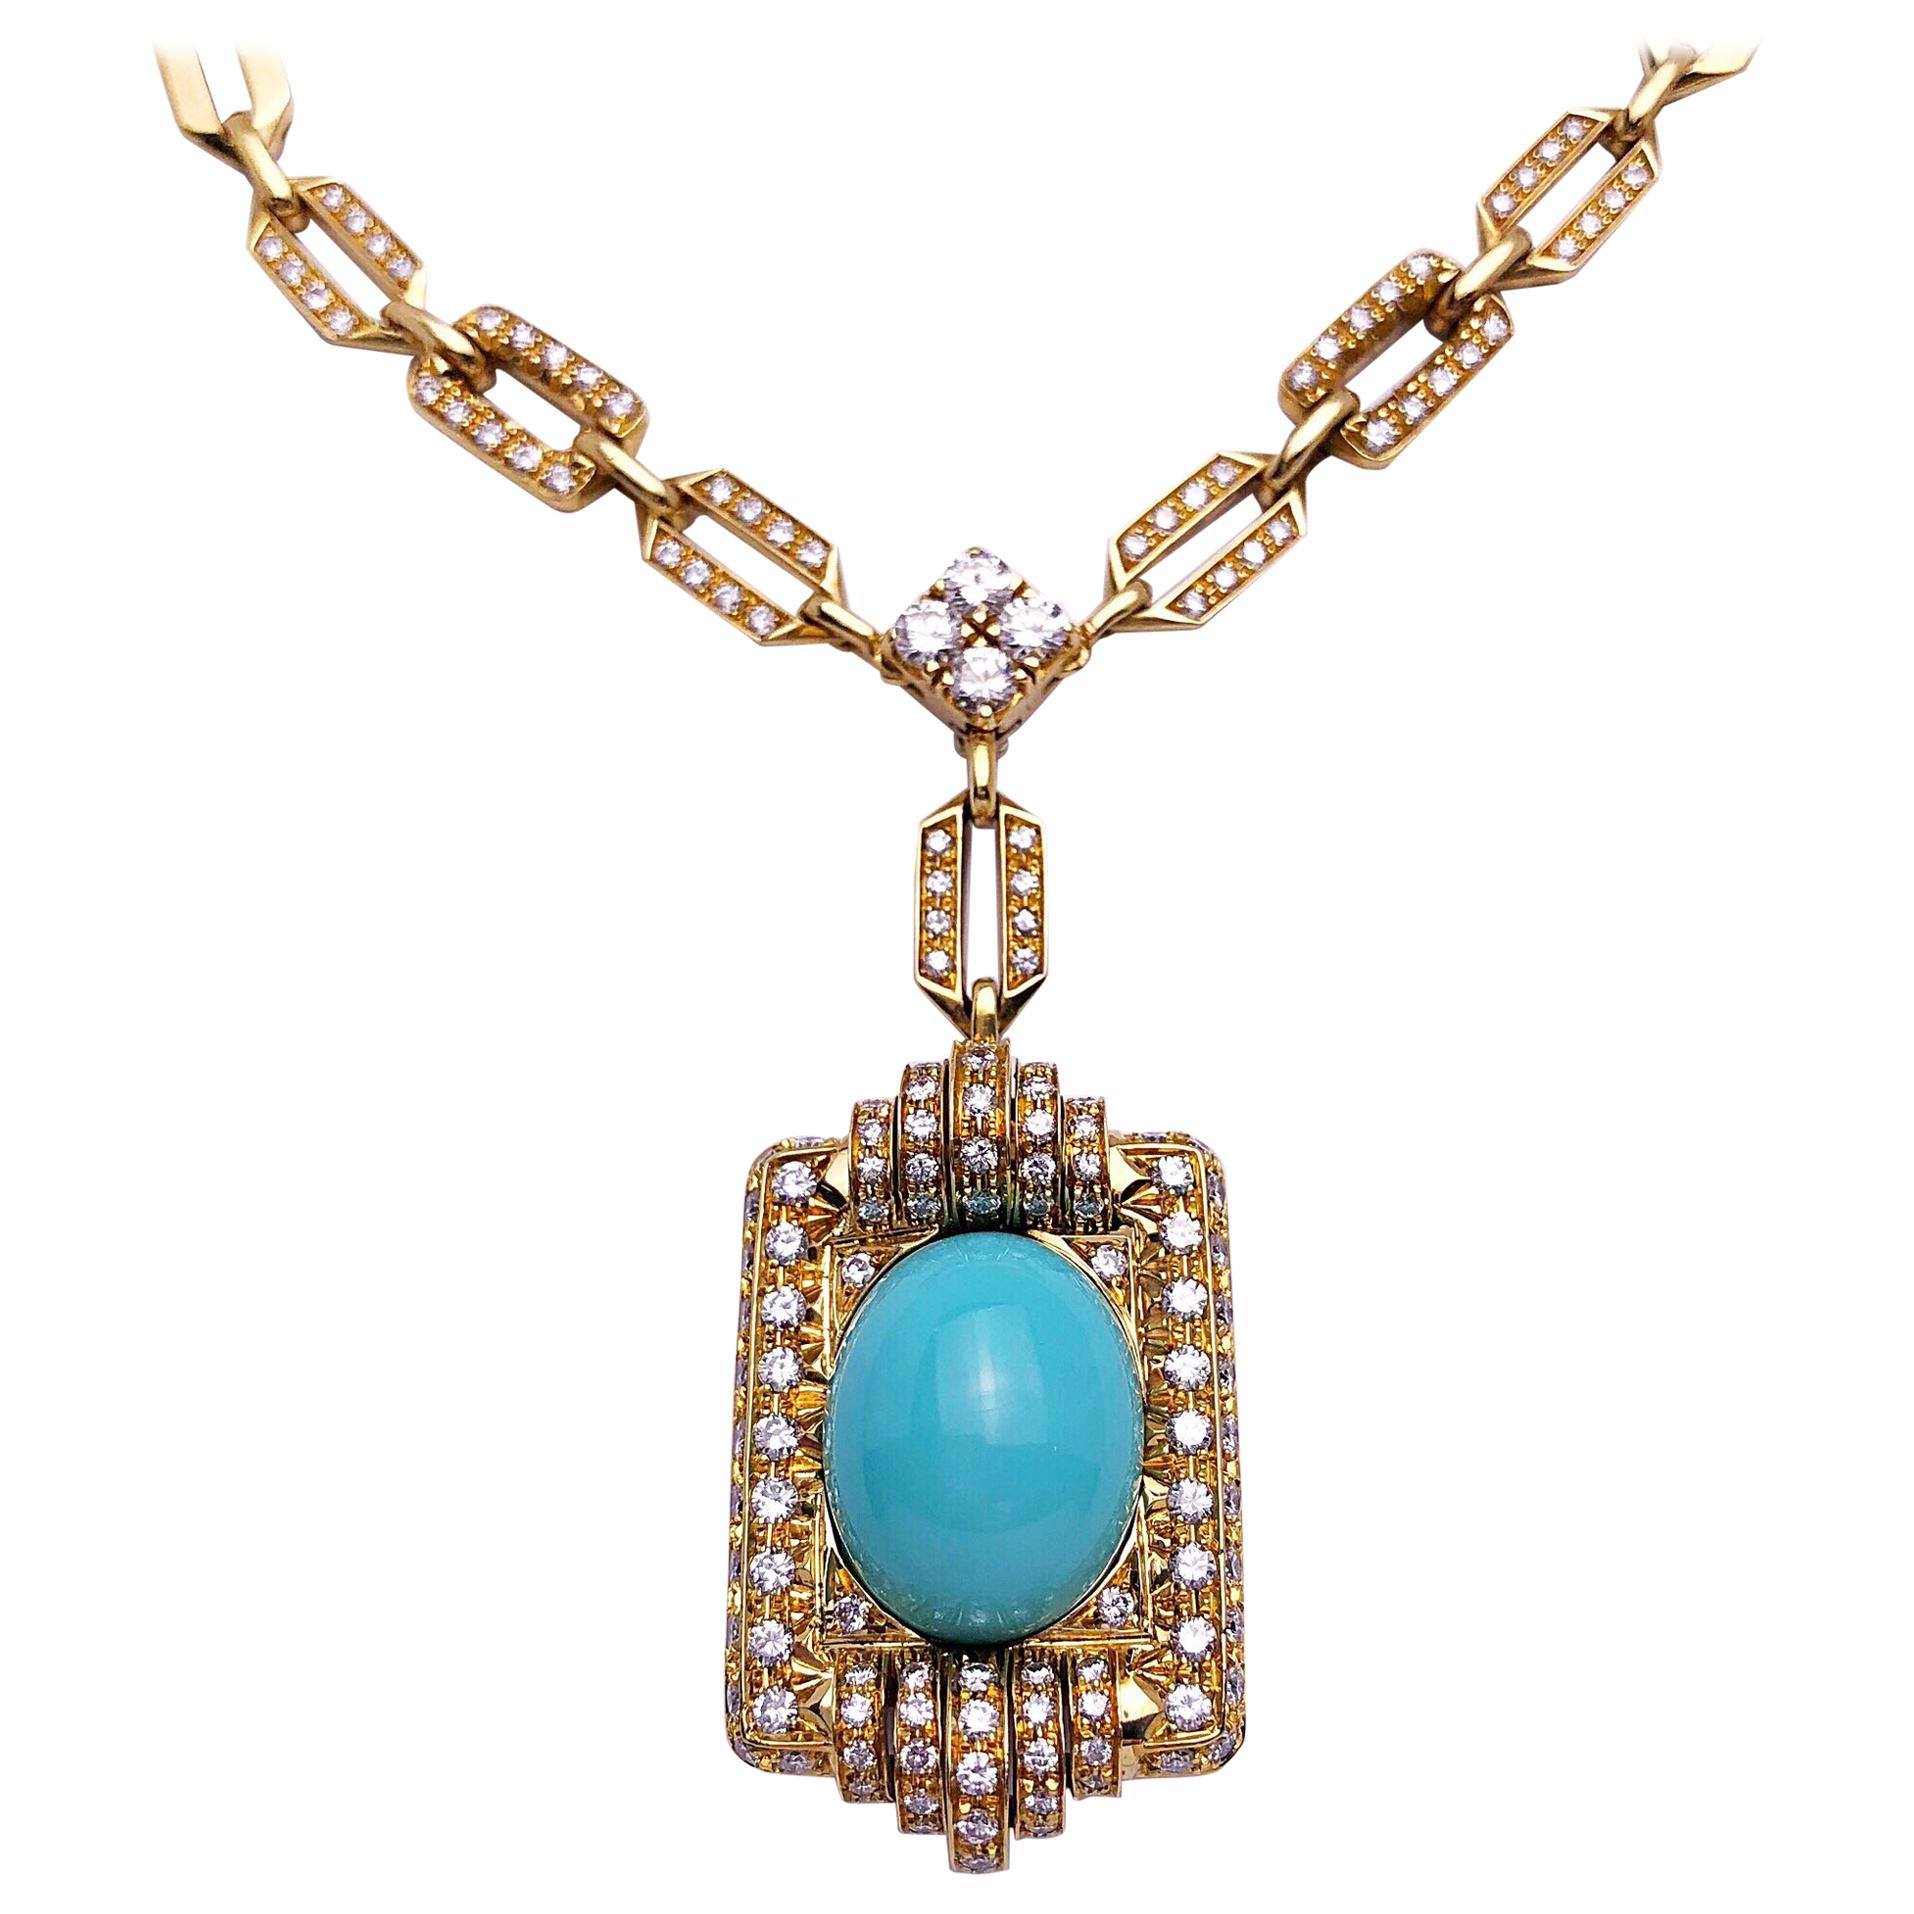 Vintage 18Kt Gold, 9.42ct. Diamond Necklace with a 21.02ct Persian Turquoise